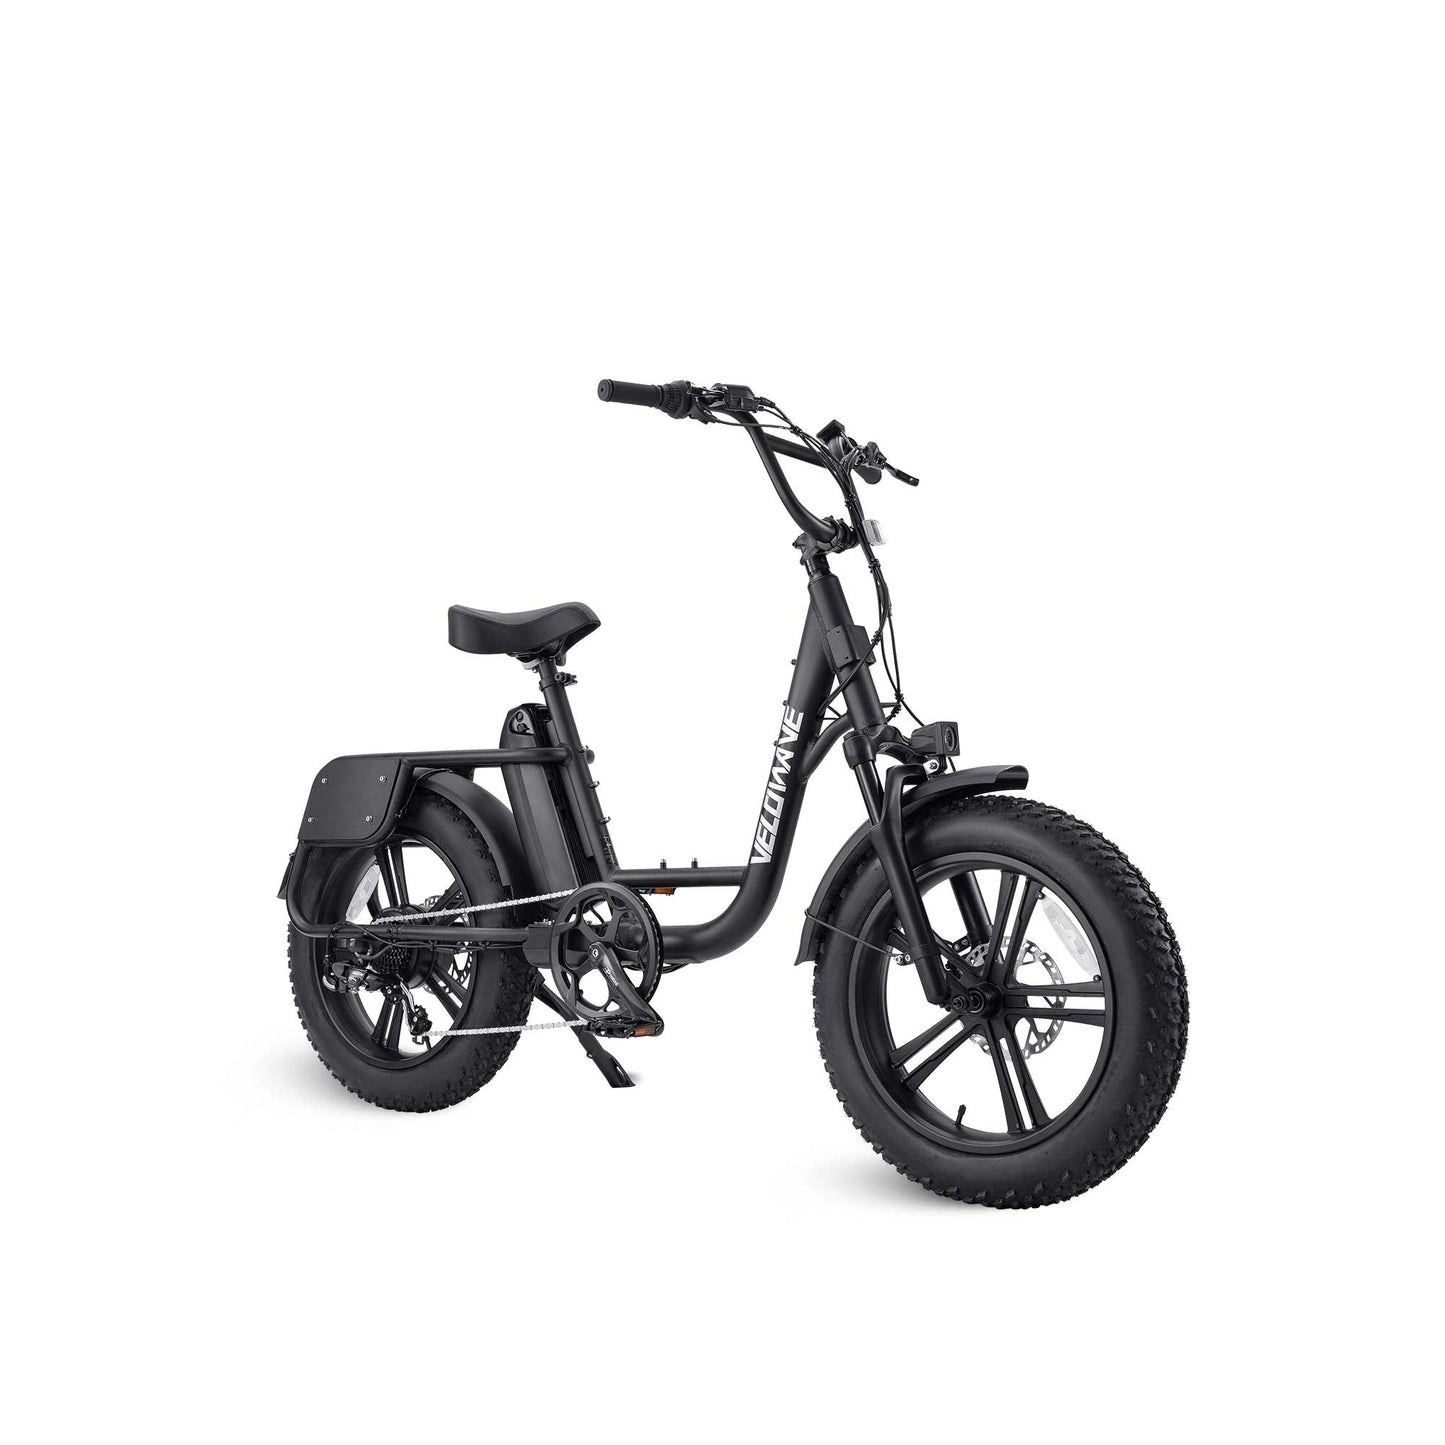 Velowave Prado S Commuter Step Thru Ebike - Fat Tire and Thick Saddle For Comfort Riding